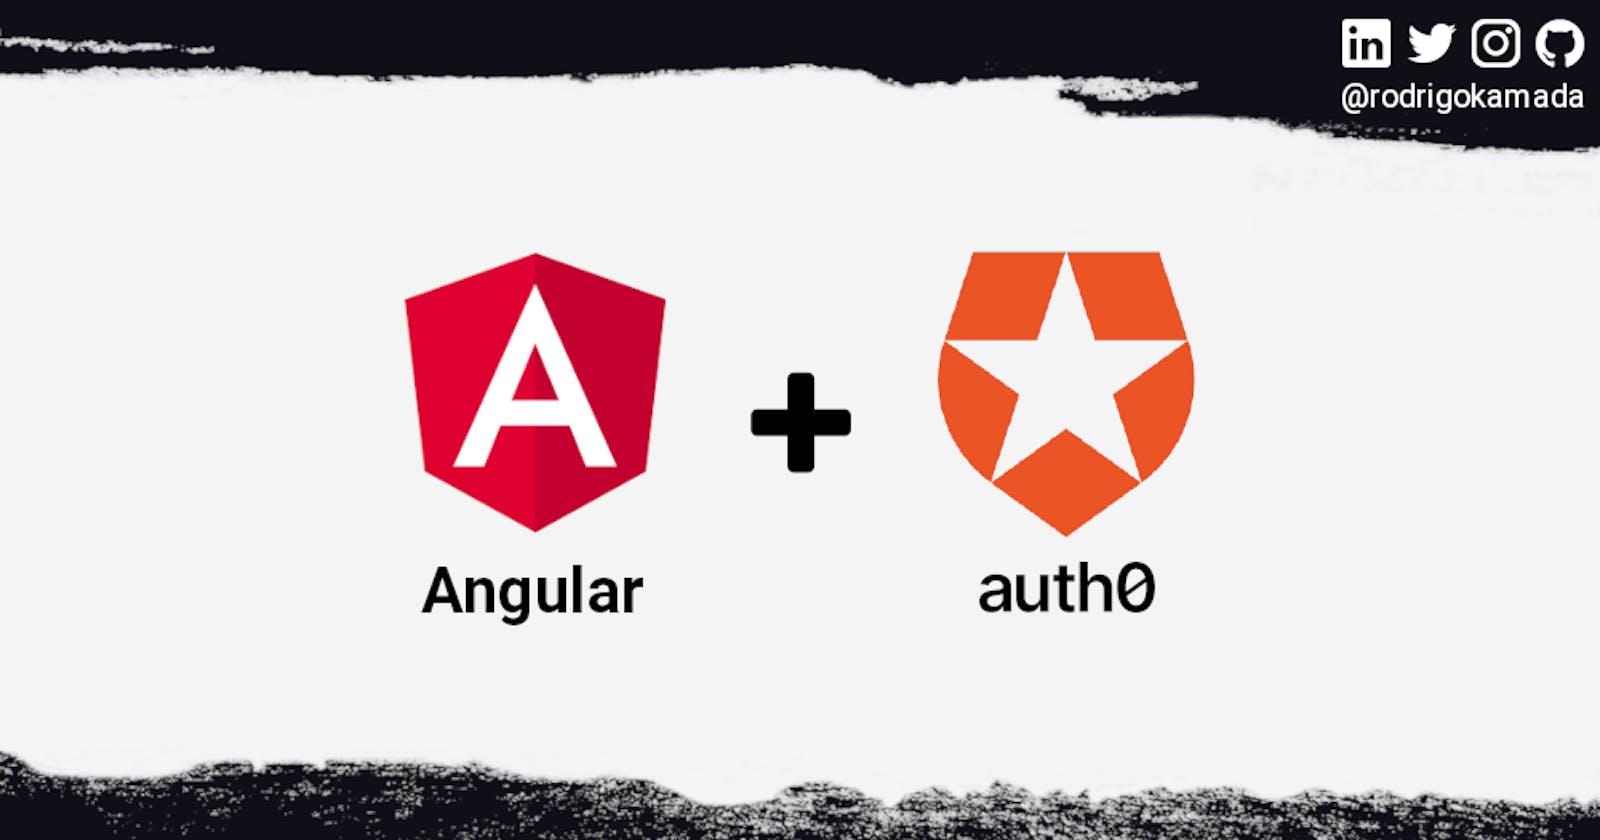 Authentication using the Auth0 to an Angular application